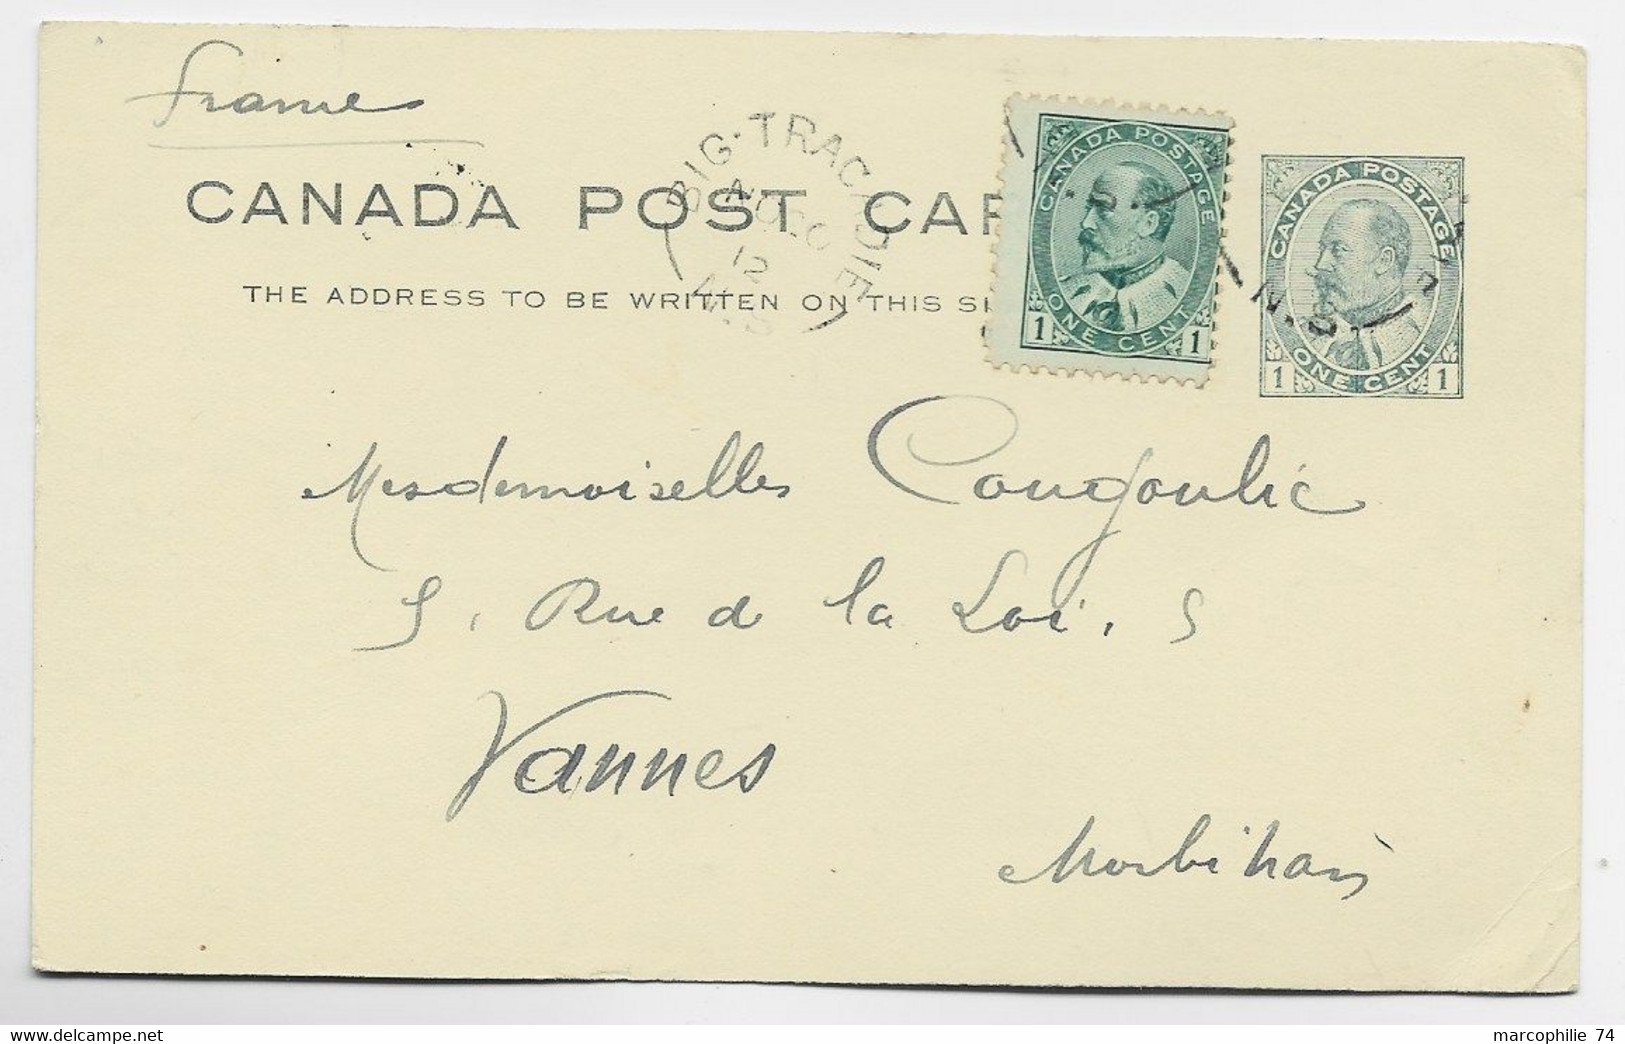 CANADA ENTIER ONE CENT POST CARD + 1C BIG TRACADIE NO 20 1912 TO FRANCE - 1903-1954 Könige